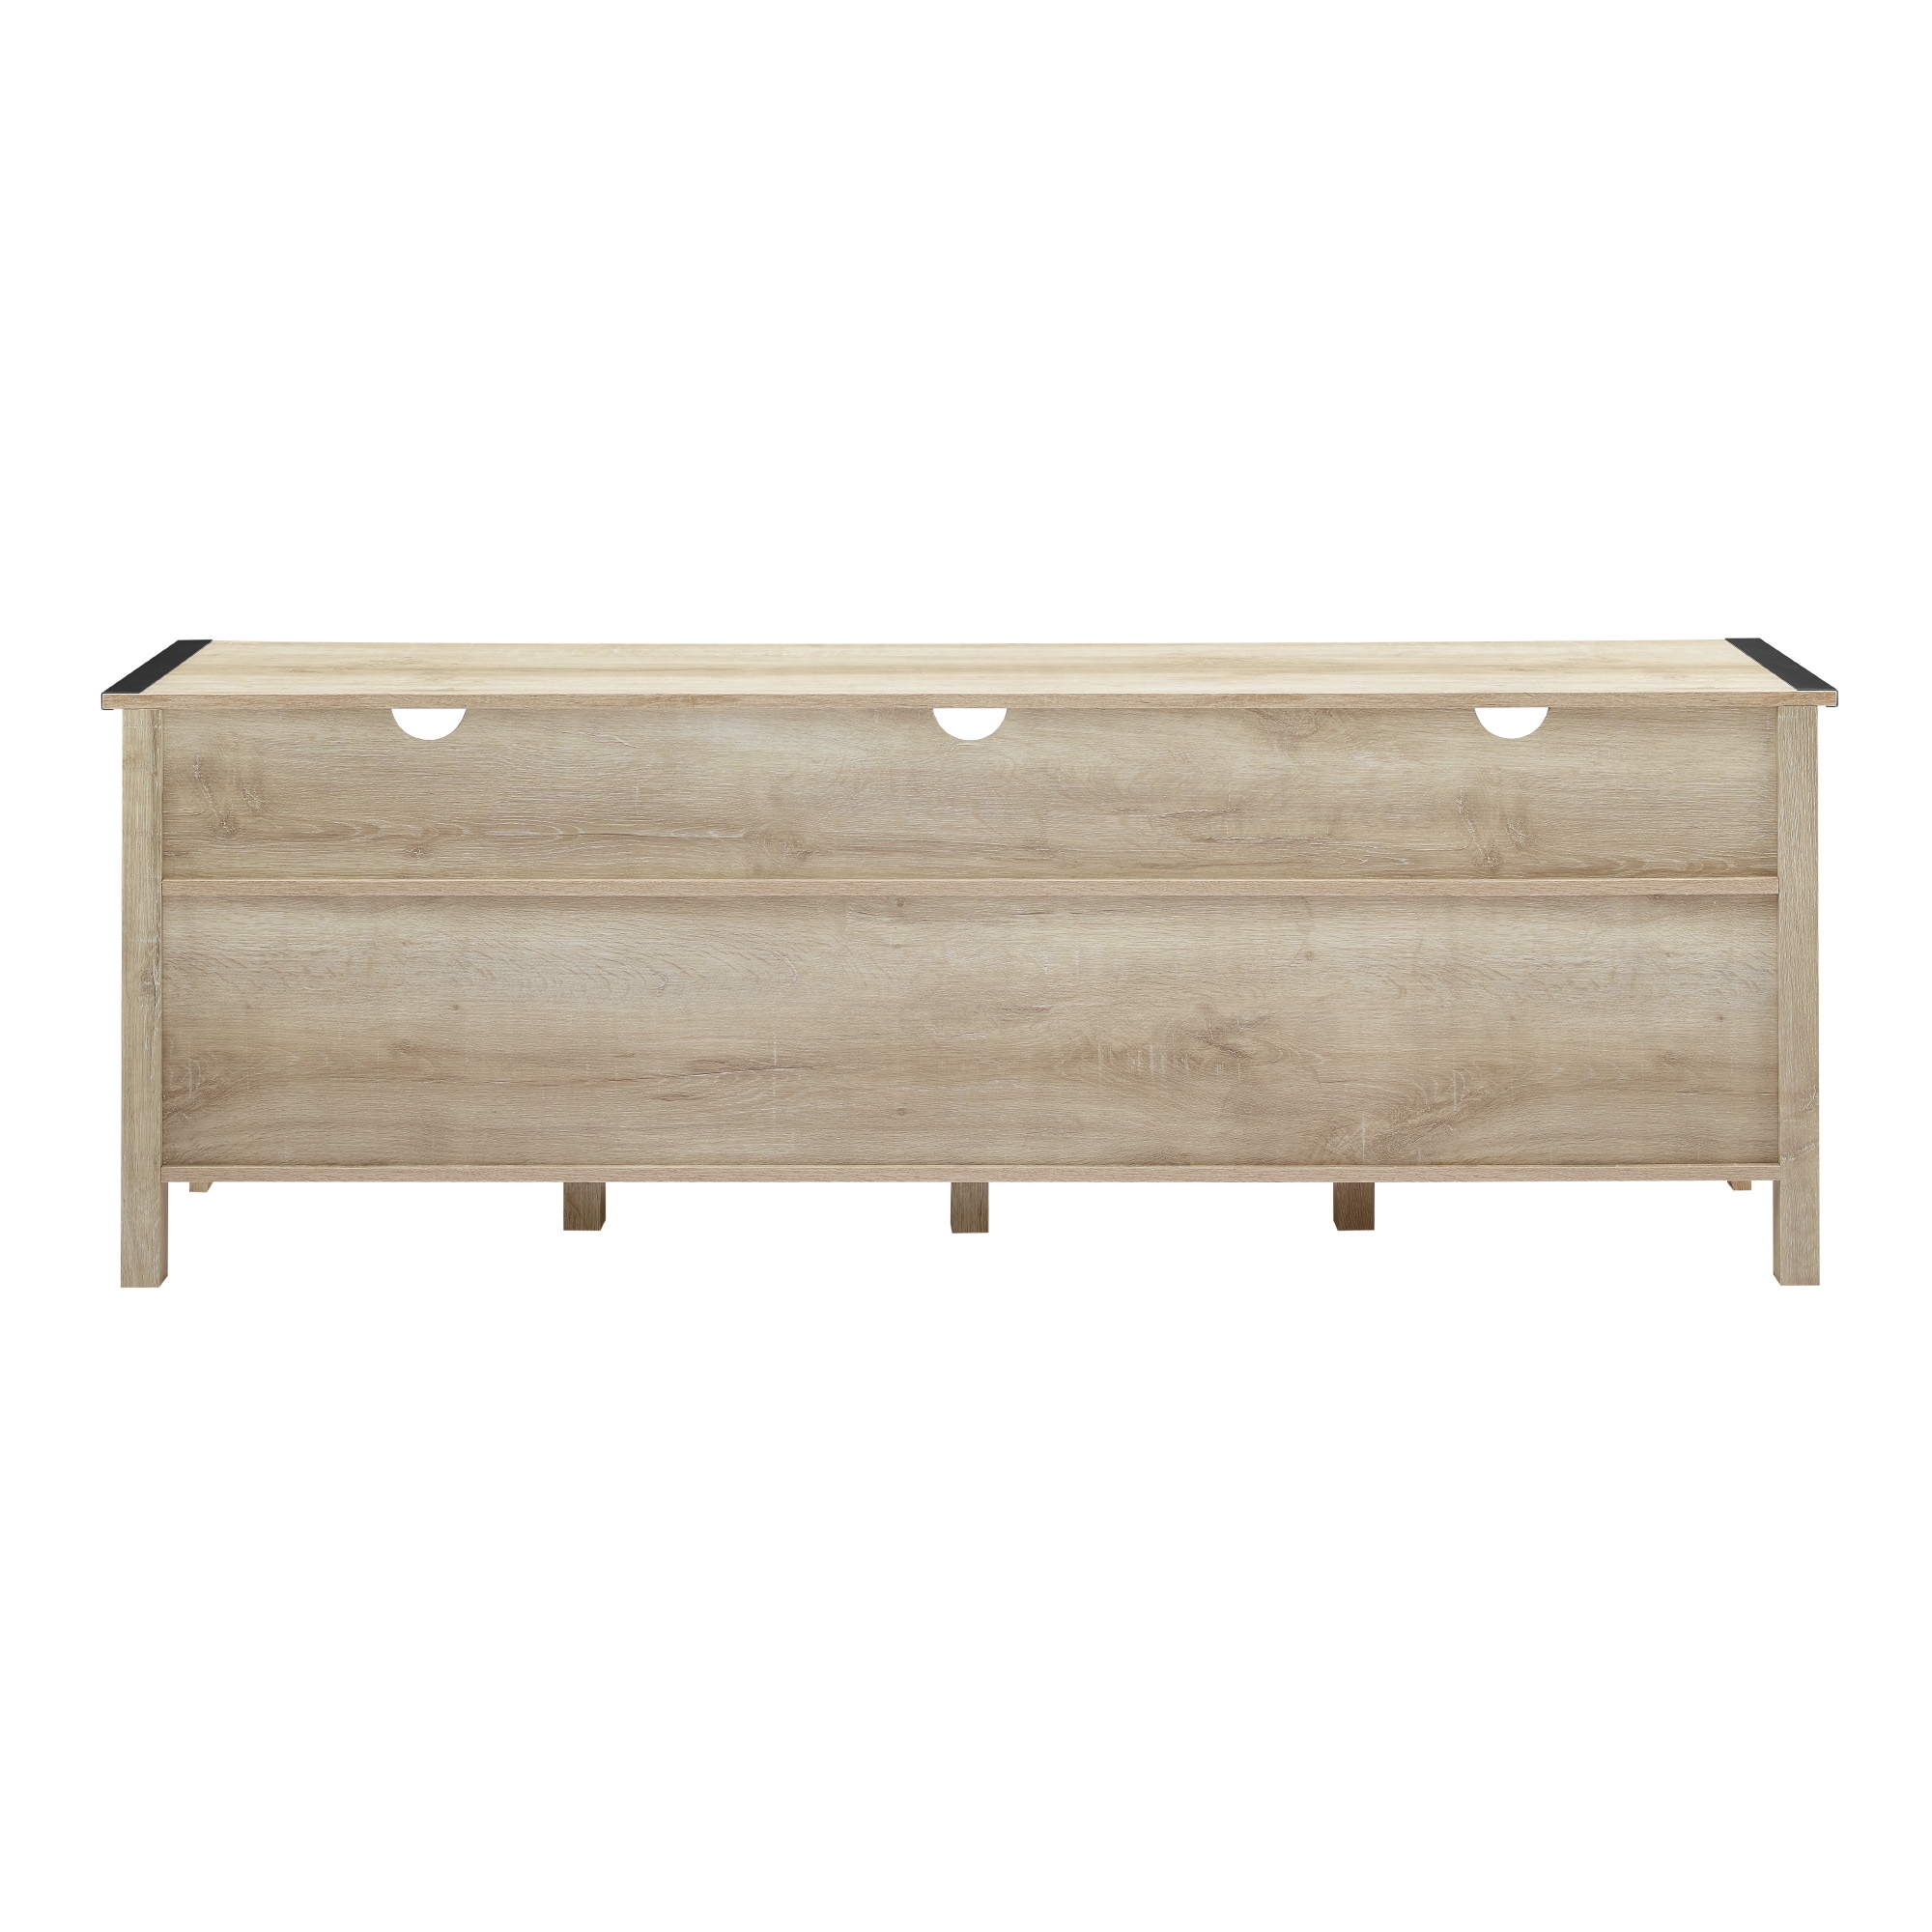 Clair 70" Industrial Farmhouse 4-Drawer TV Stand - White Oak - Image 3